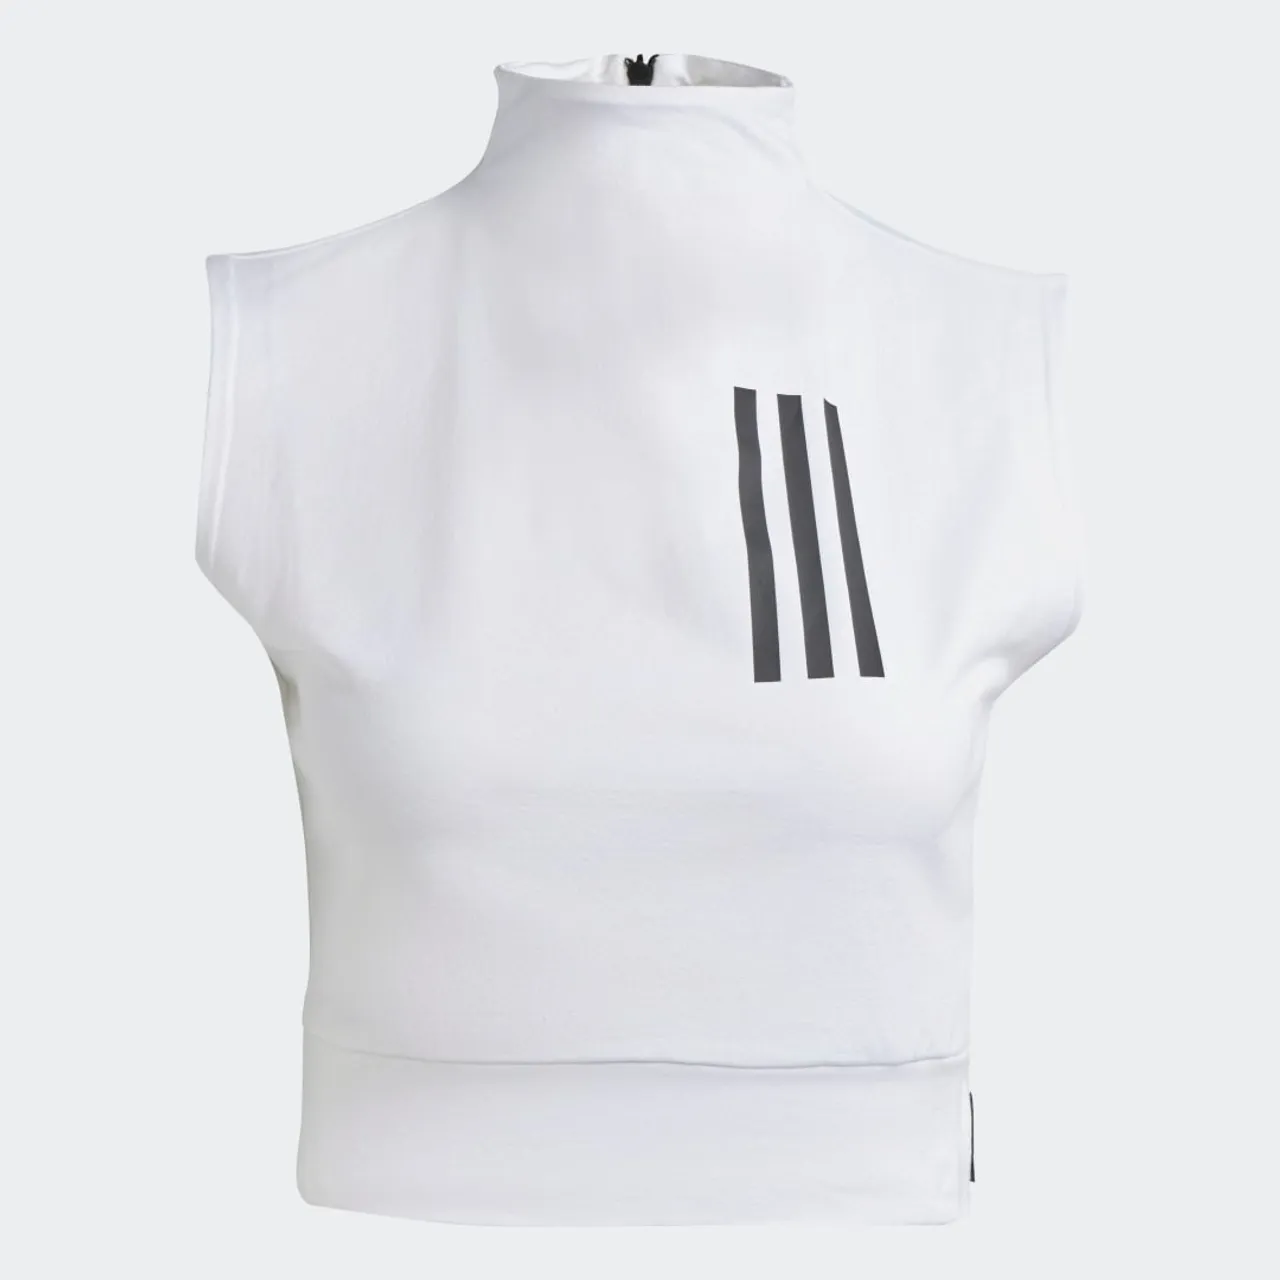 Mission Victory Sleeveless Crop-Top